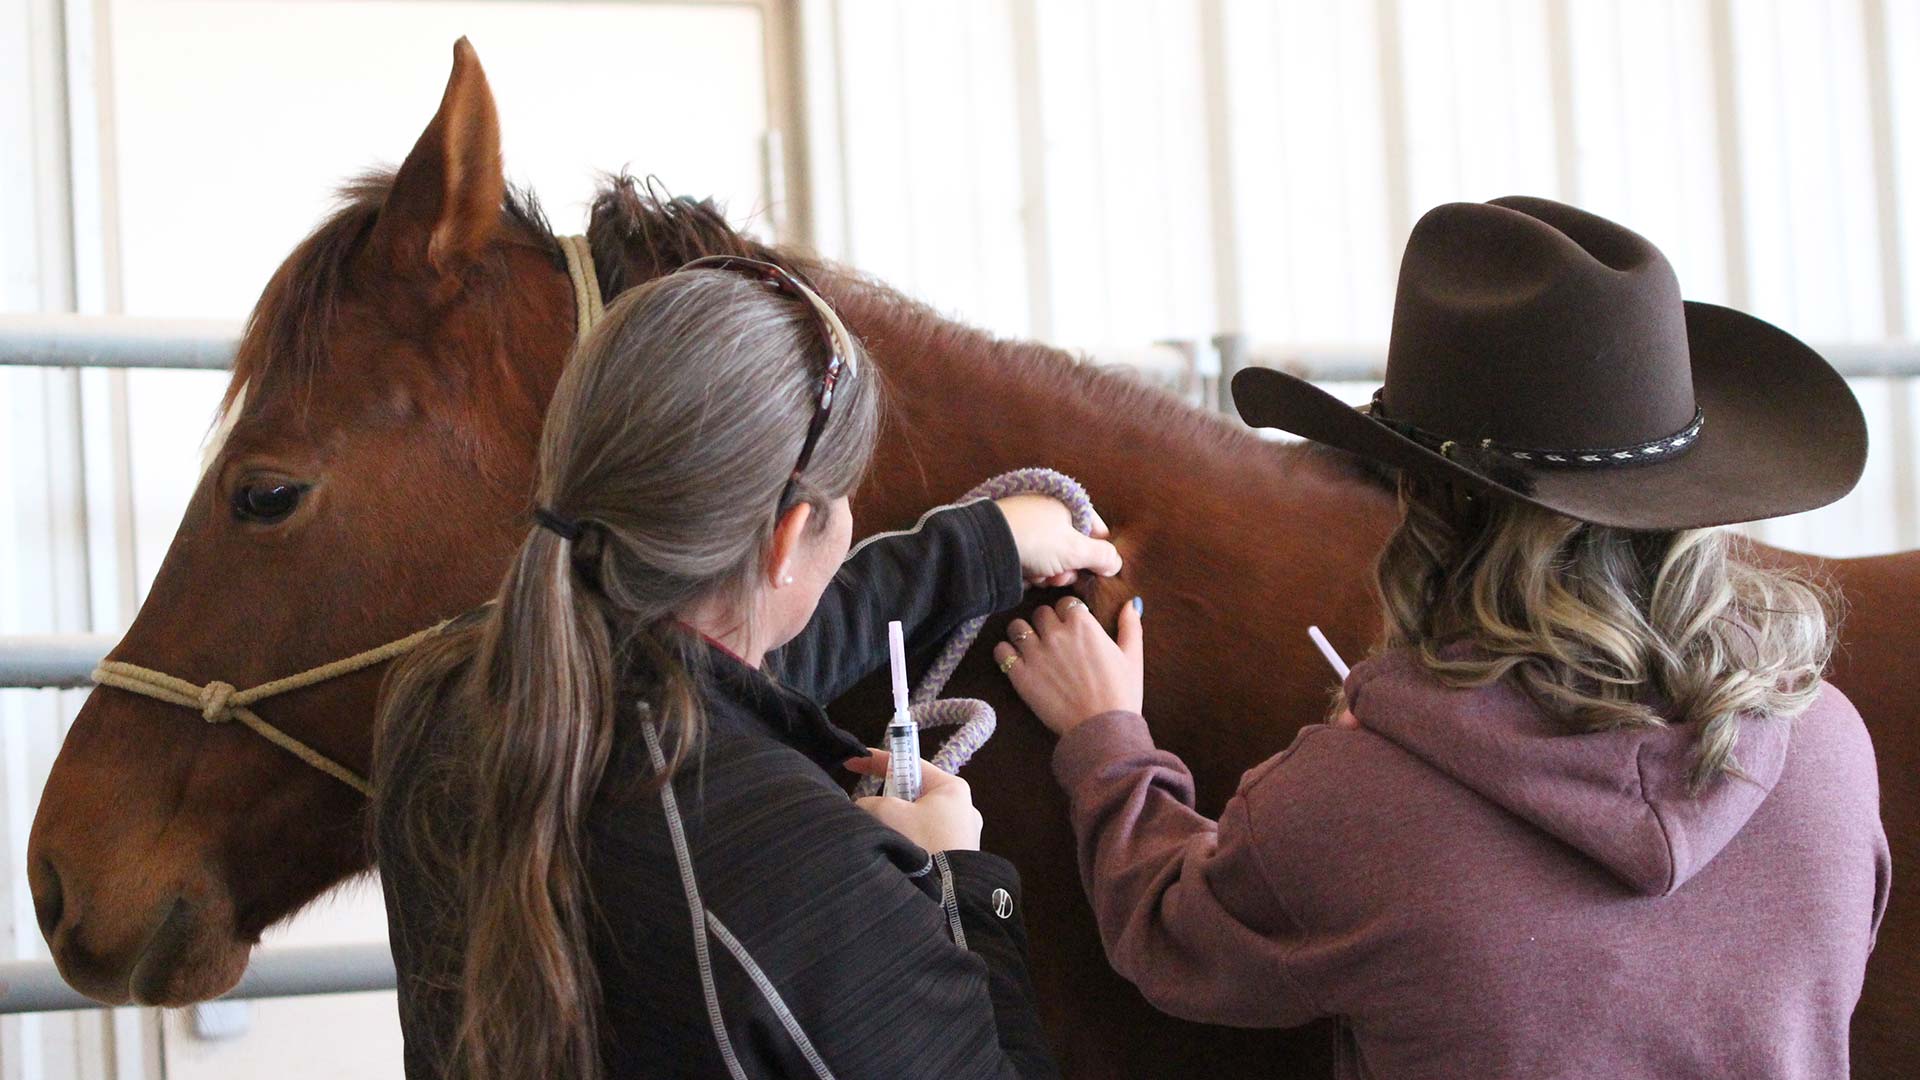 Student and professor vaccinating a horse.